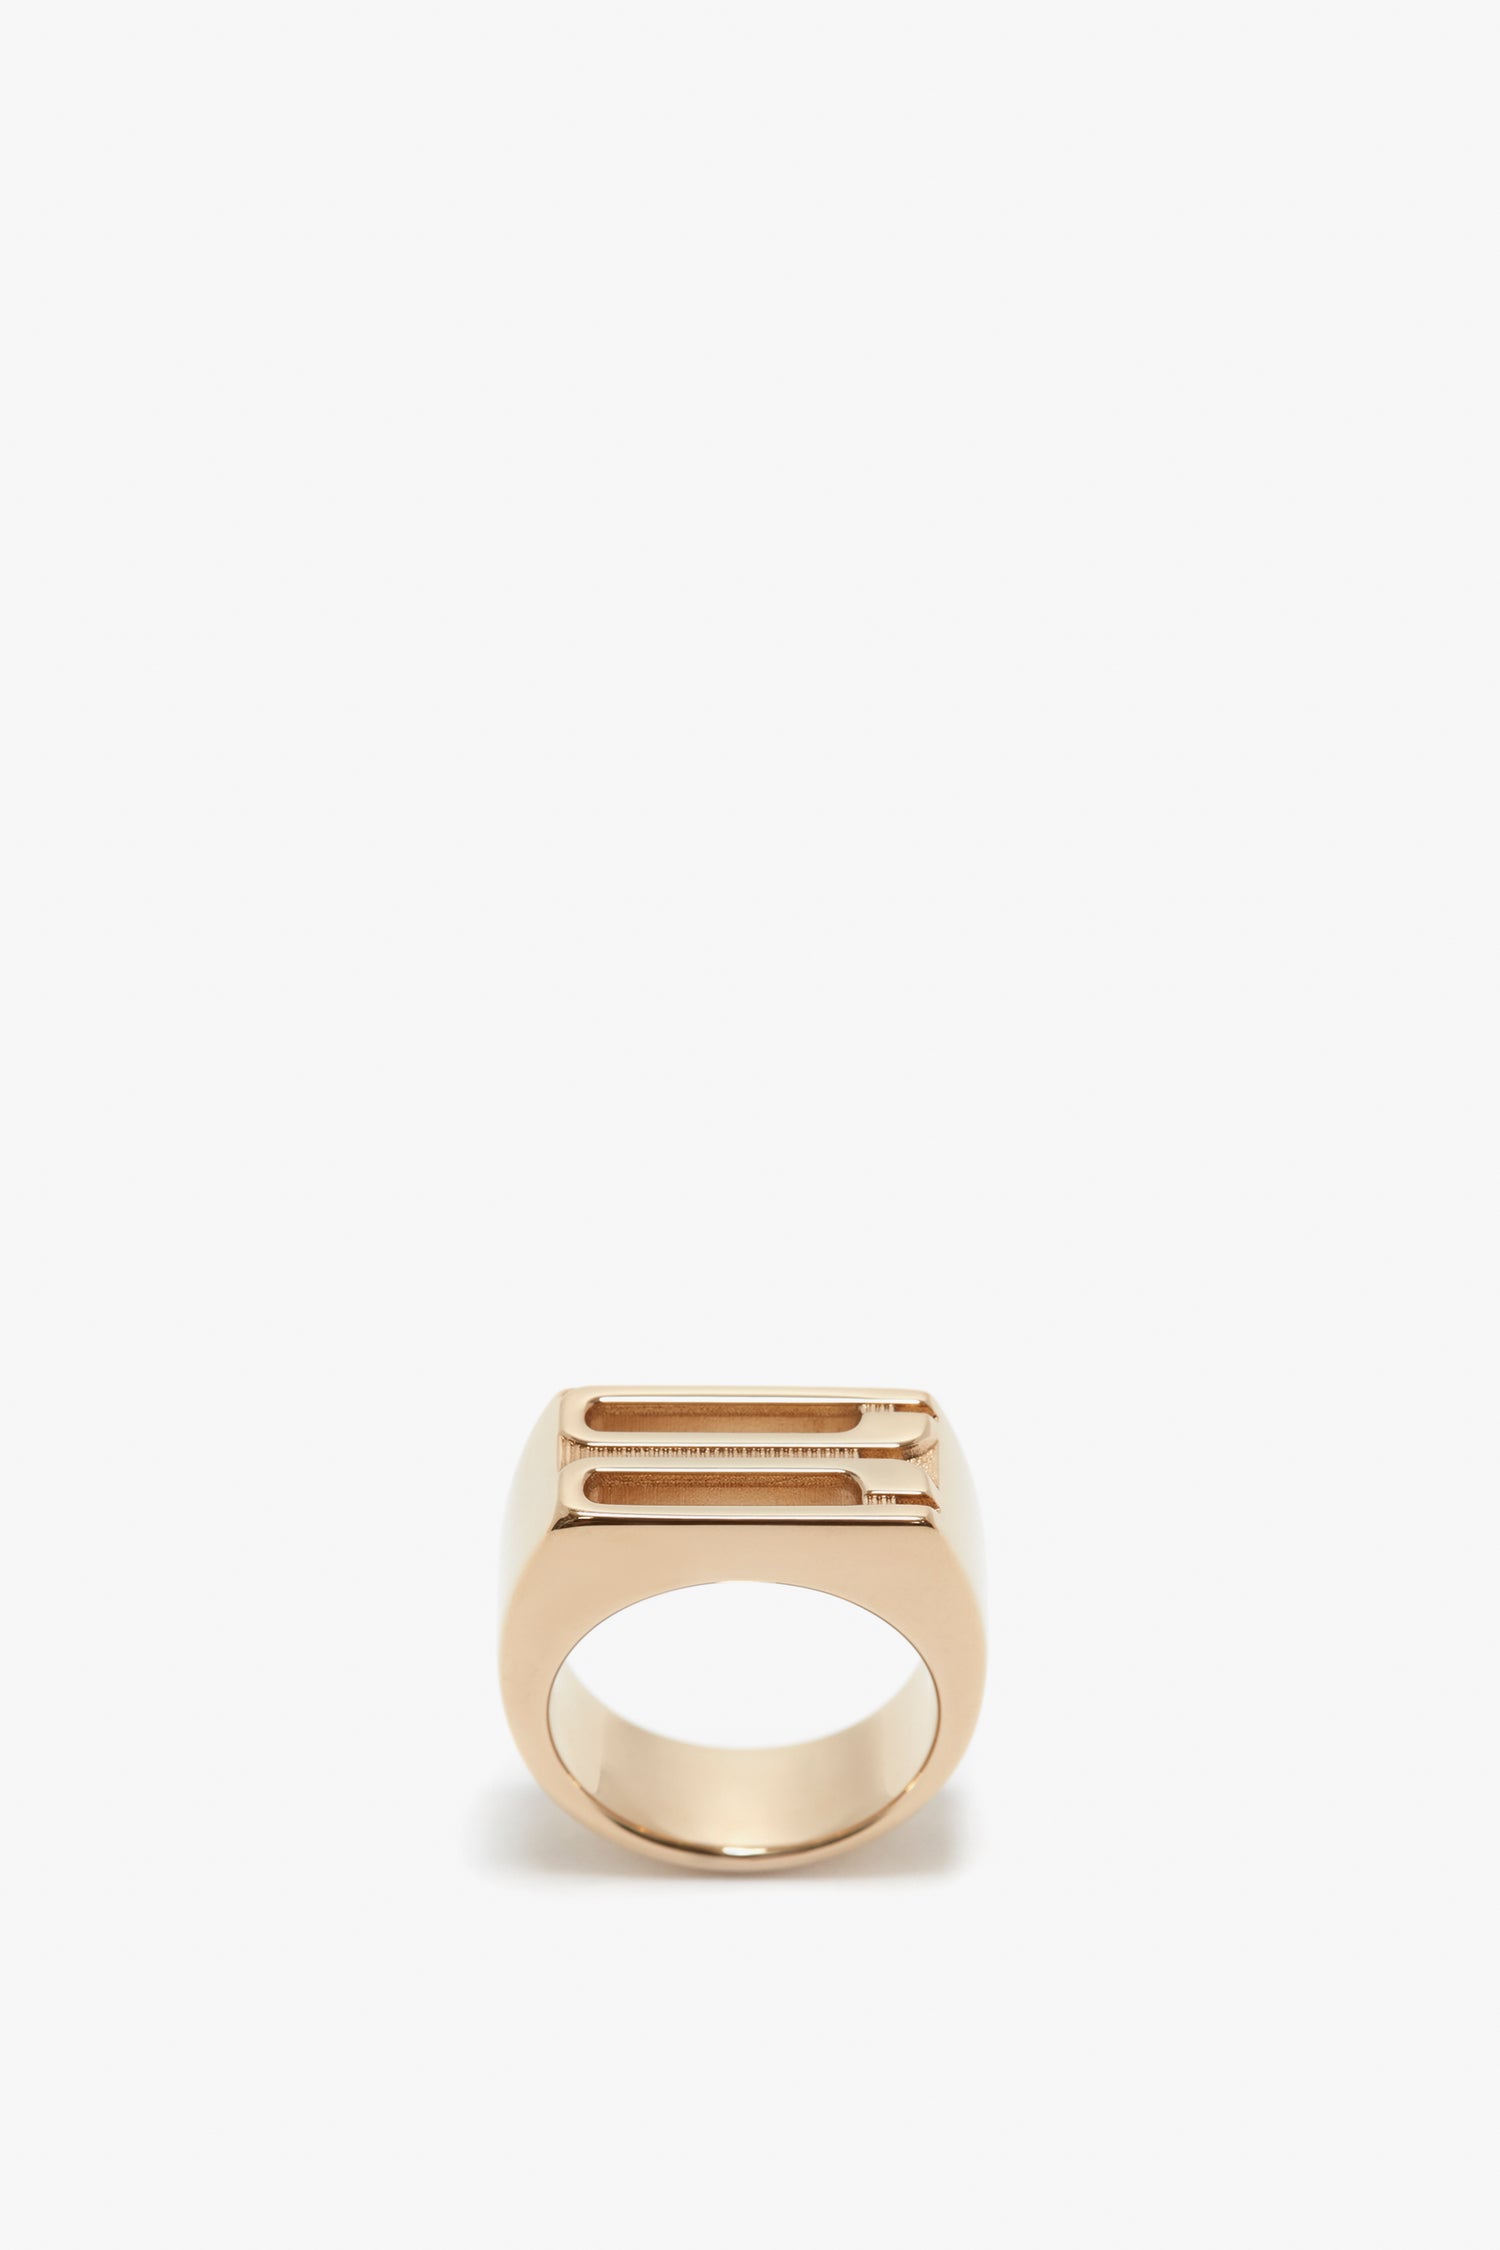 A minimalist Exclusive Frame Signet Ring In Gold by Victoria Beckham with a sleek, slightly rectangular design, displayed against a plain white background.